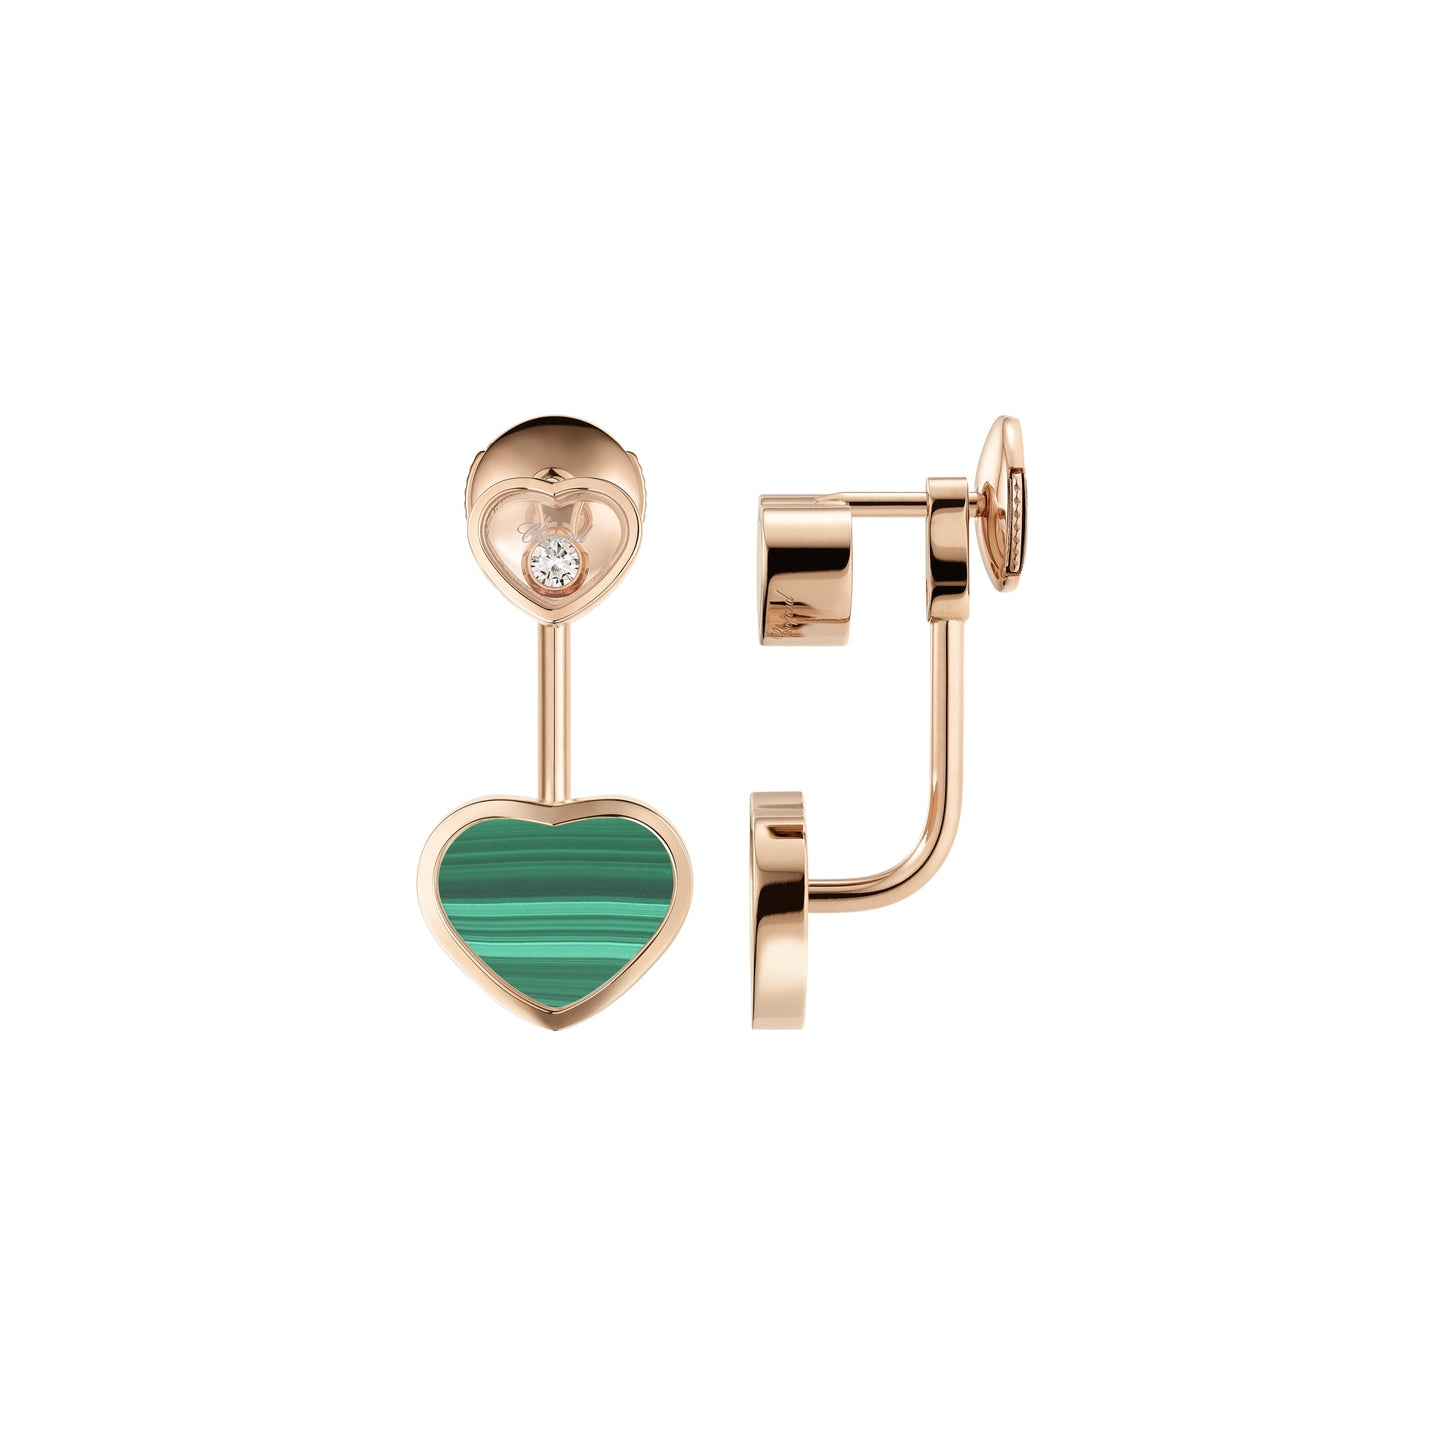 HAPPY HEARTS EARRINGS, ETHICAL ROSE GOLD, DIAMONDS, MALACHITE 83A082-5102